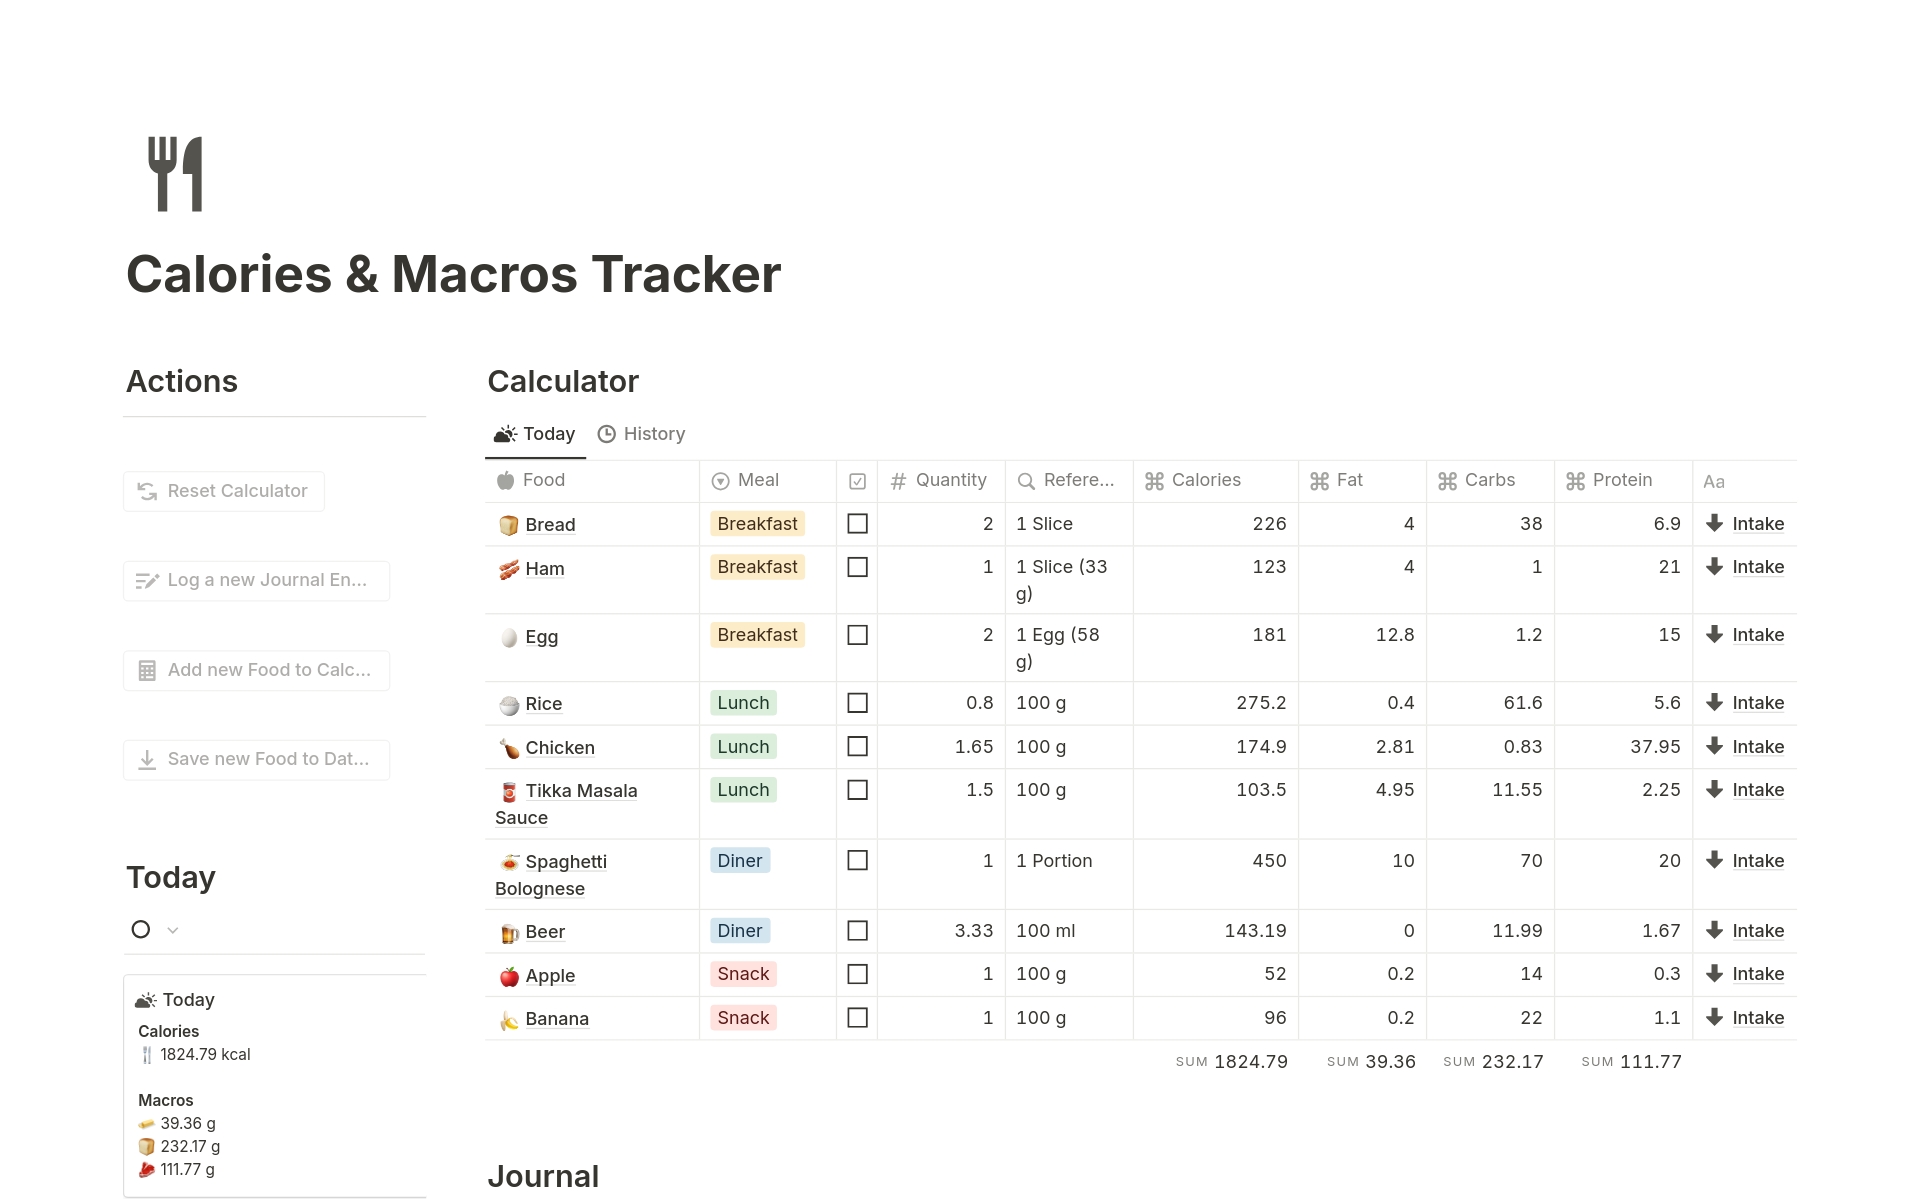 Introducing this Calories and Macros Tracker. Effortlessly monitor calorie, fat, carb, and protein intake. Create an extensive food database for storing every makros of each individual food. Keep track of your progress with a personalized journal.